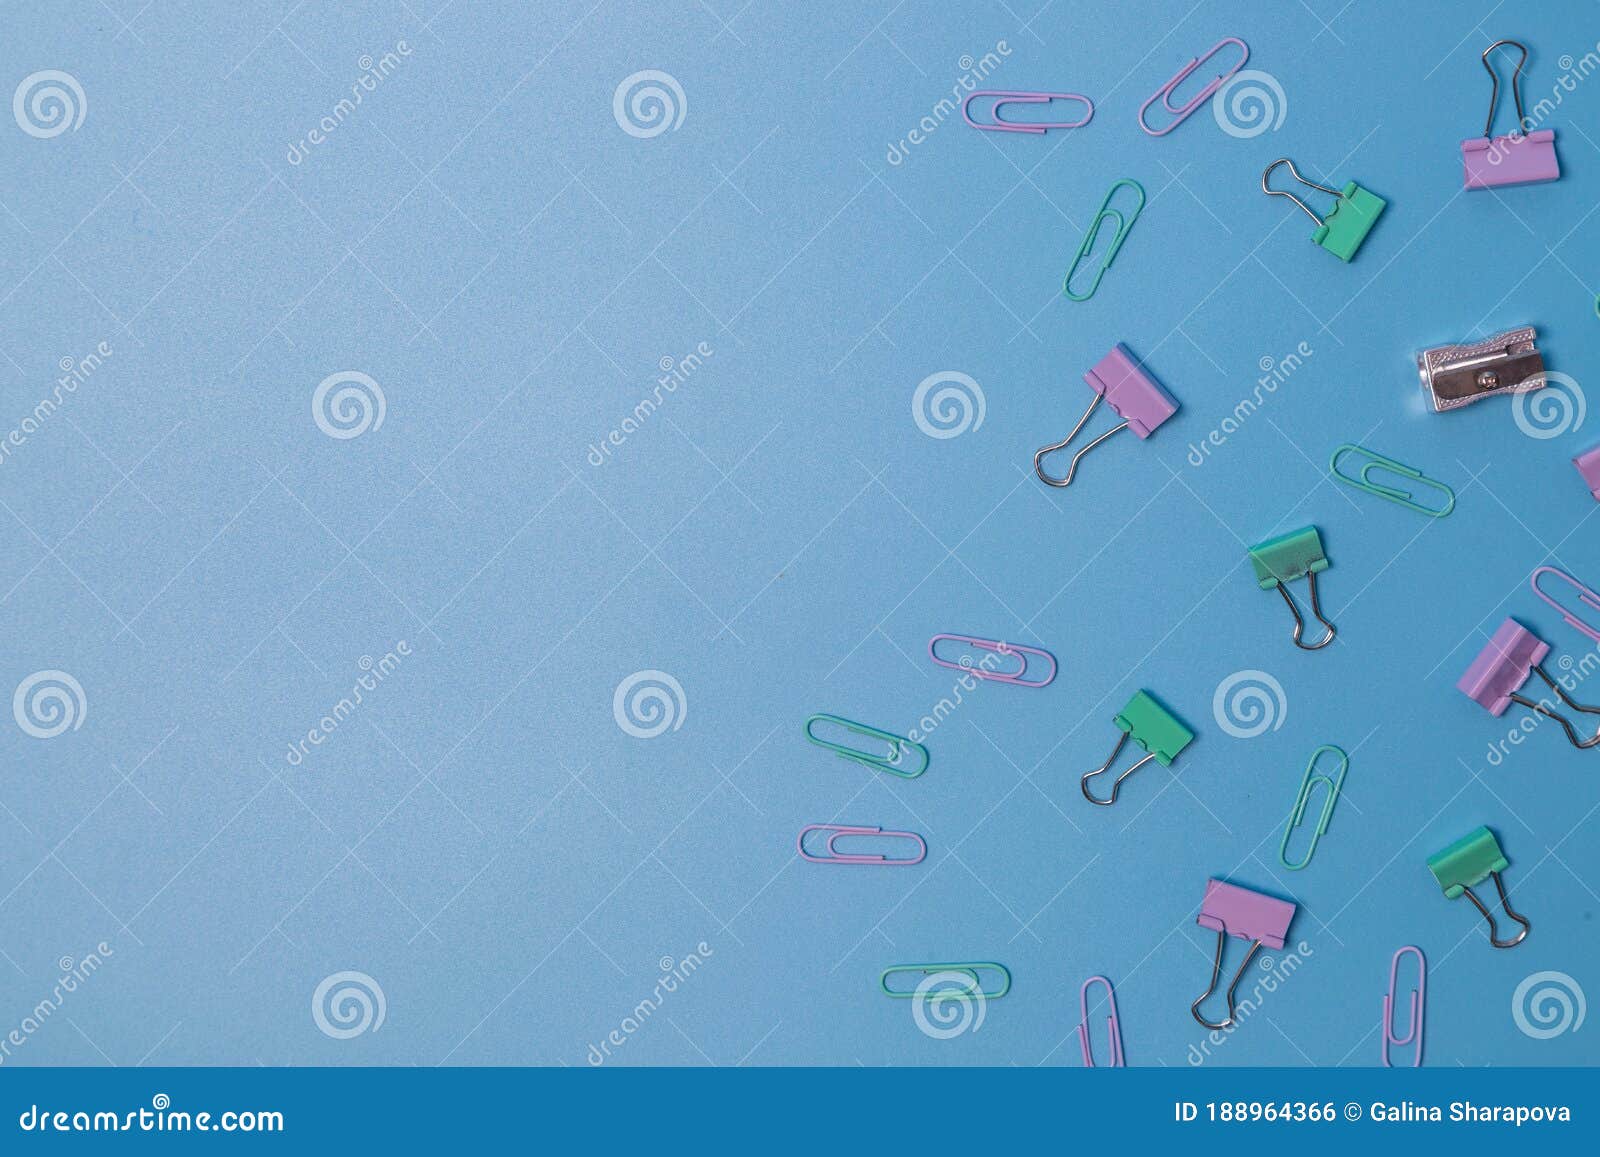 pins and paper clips collection on blue background